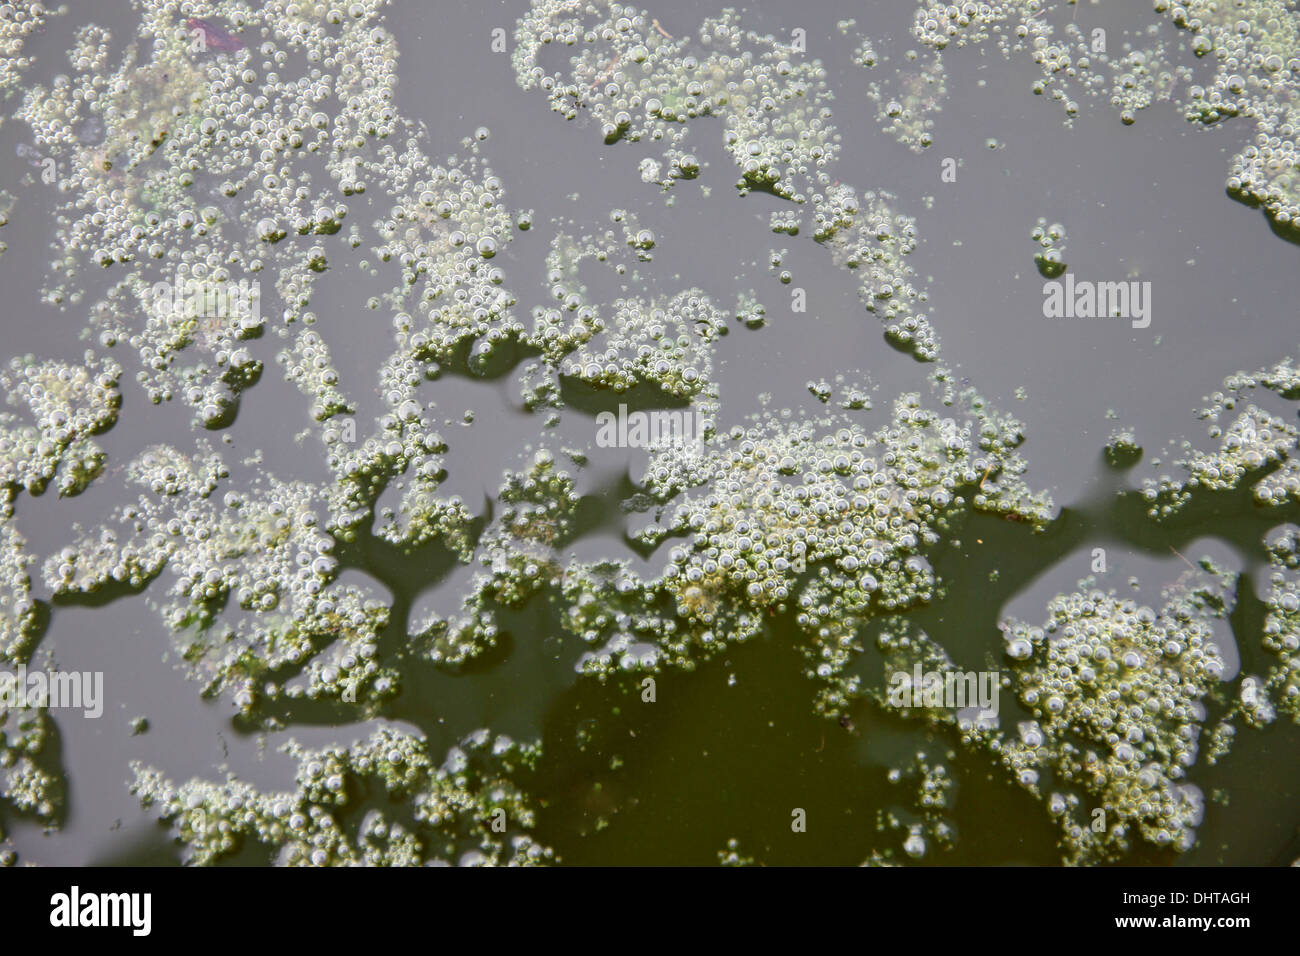 Sewage began to stink in the Wastewater treatment pond. Stock Photo